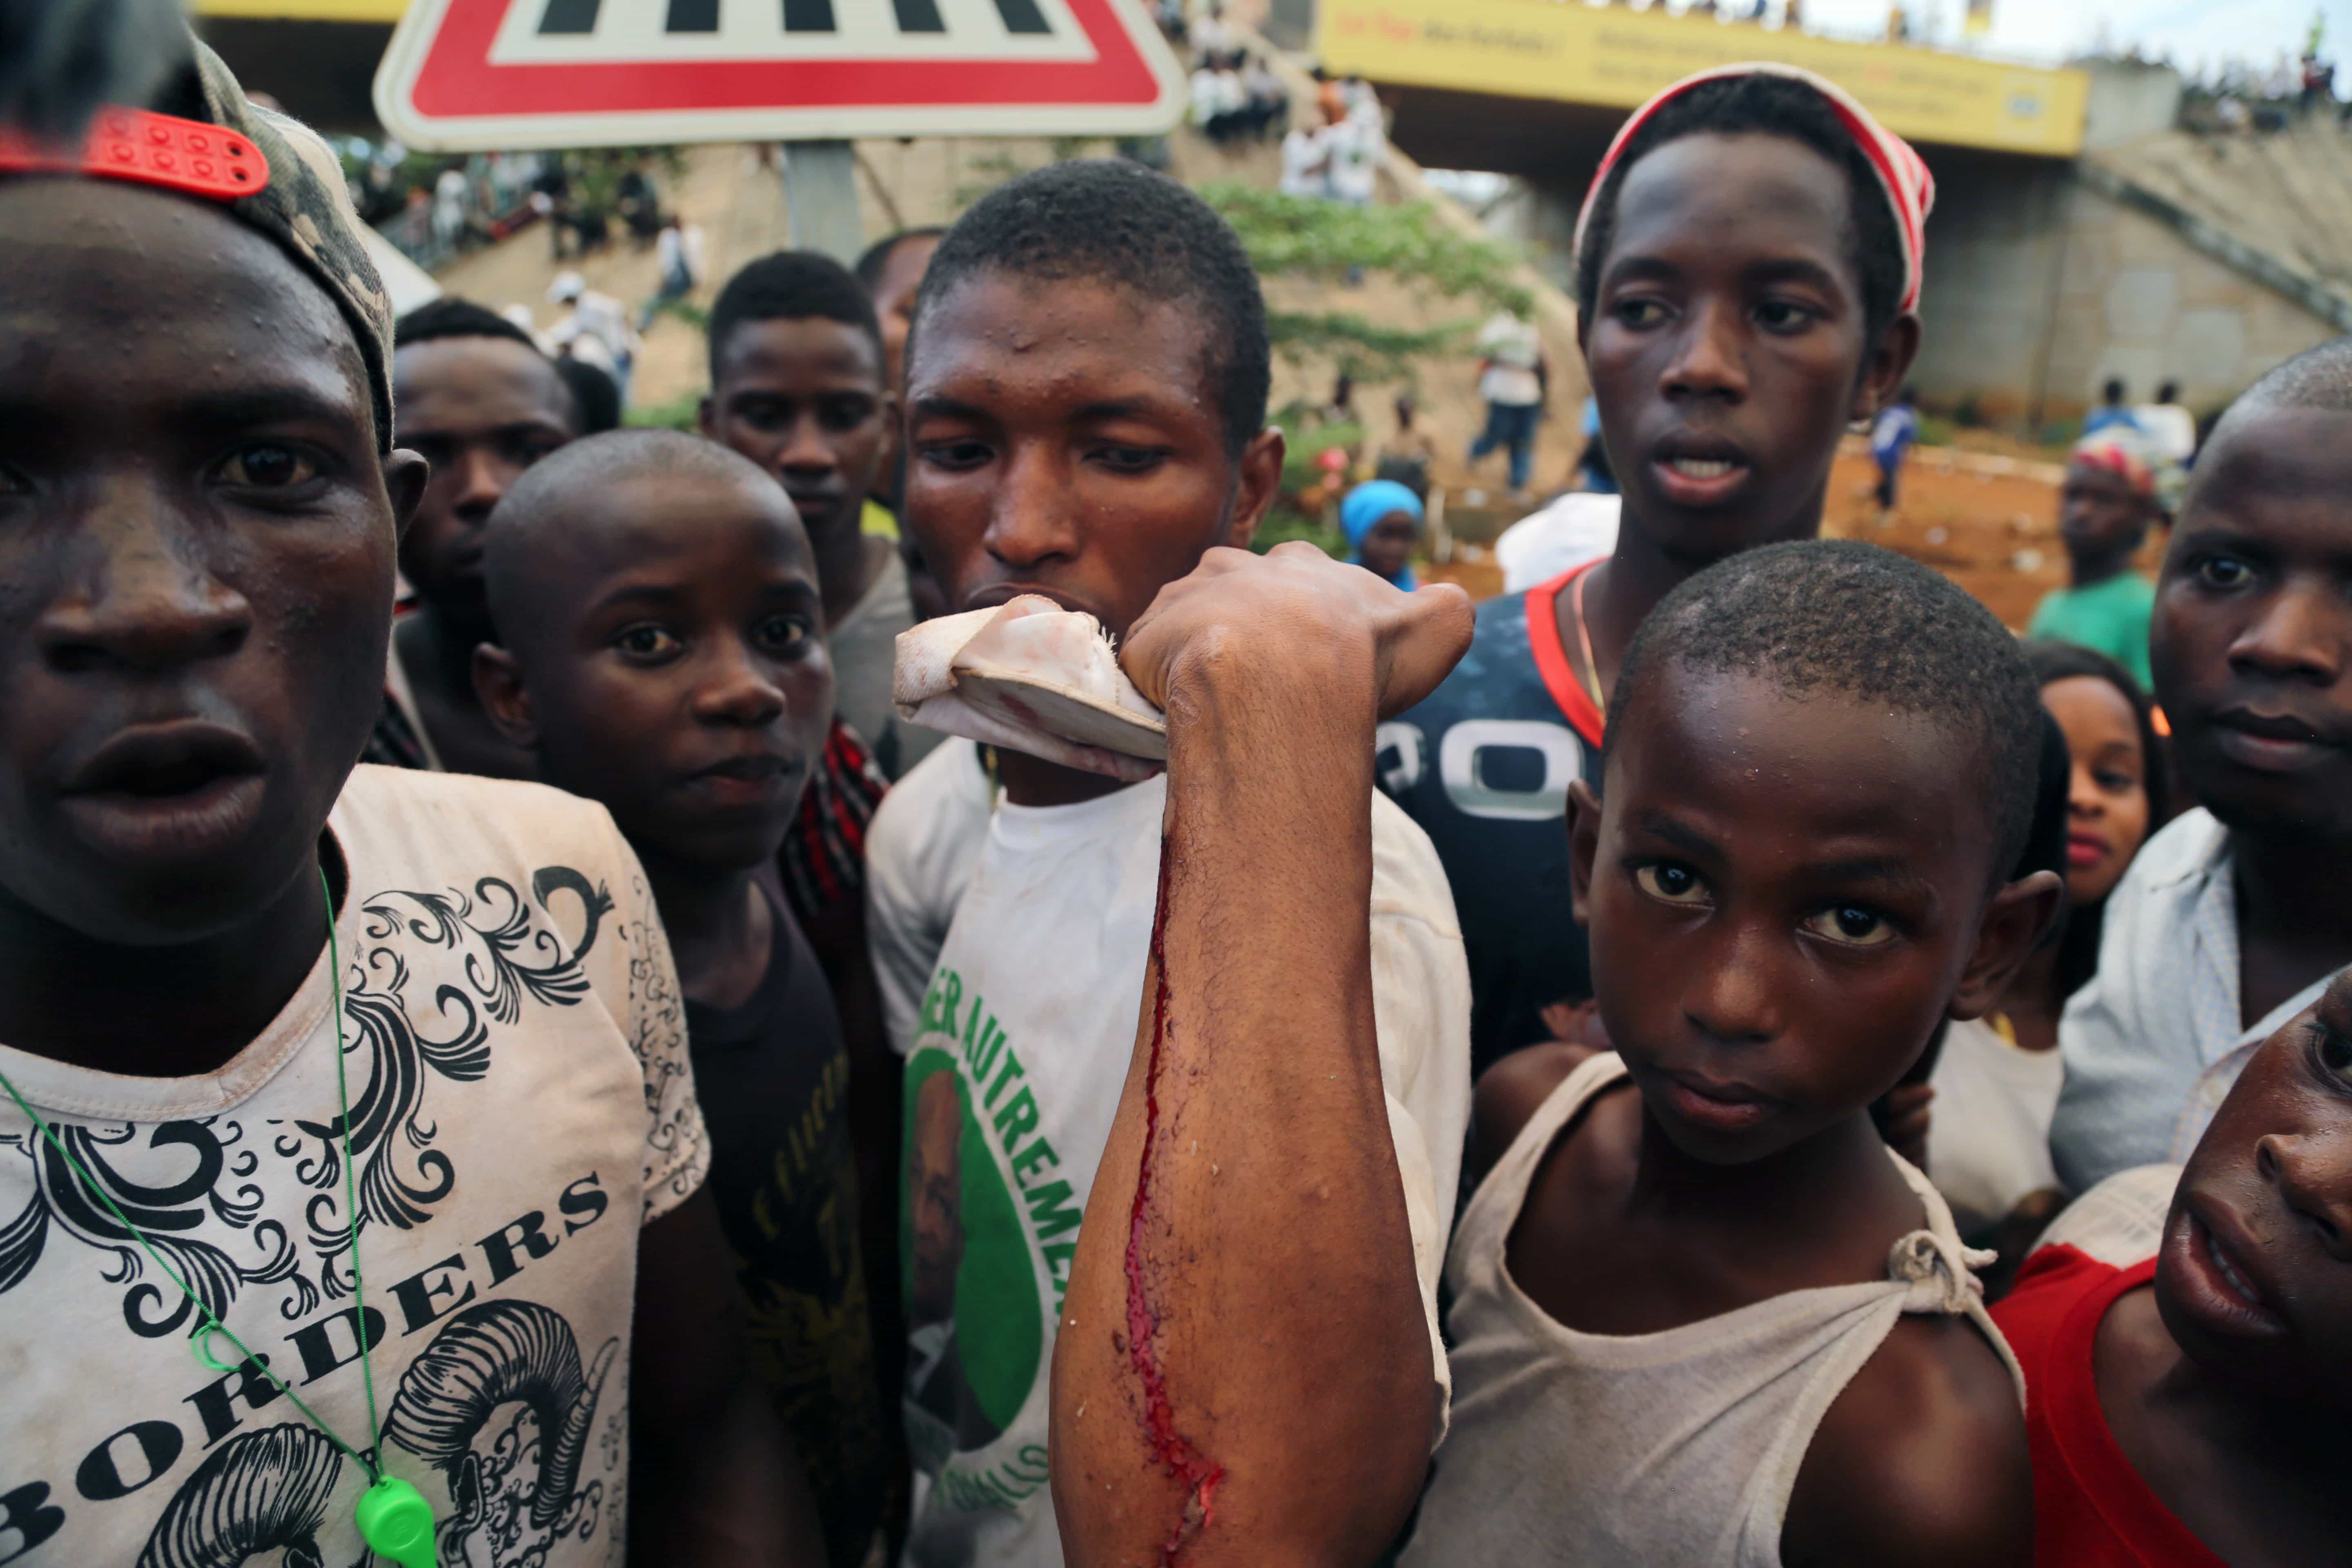 A man shows on his arm where he was injured at a rally in support of opposition presidential candidate Cellou Dalein Diallo in Conakry, Guinea, 8 October 2015., AP Photo/ Youssouf Bah